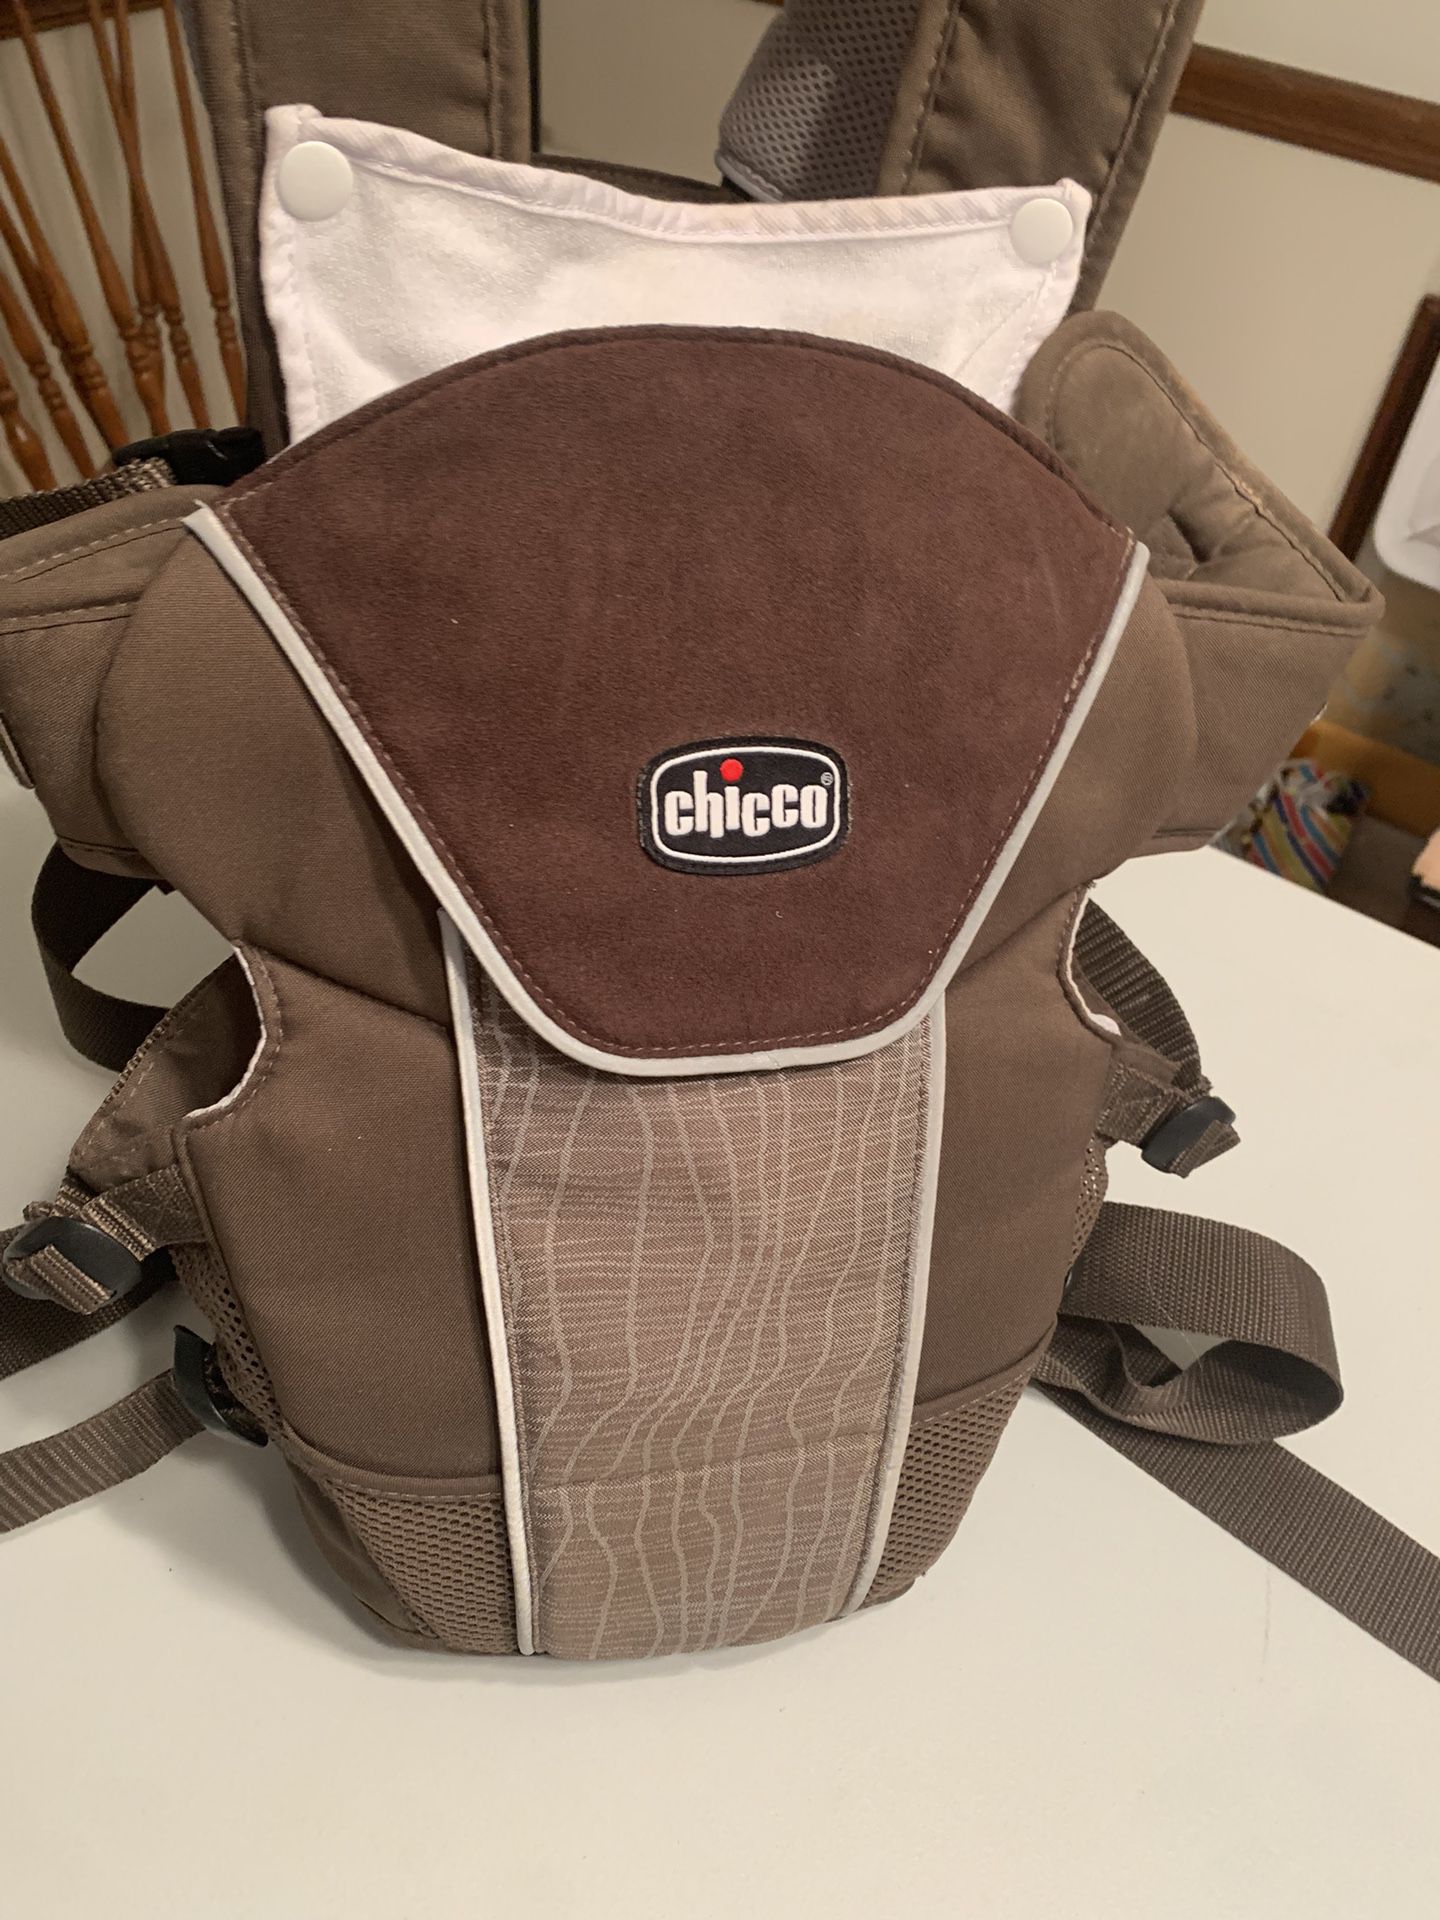 Chicco Baby/Infant Carrier 